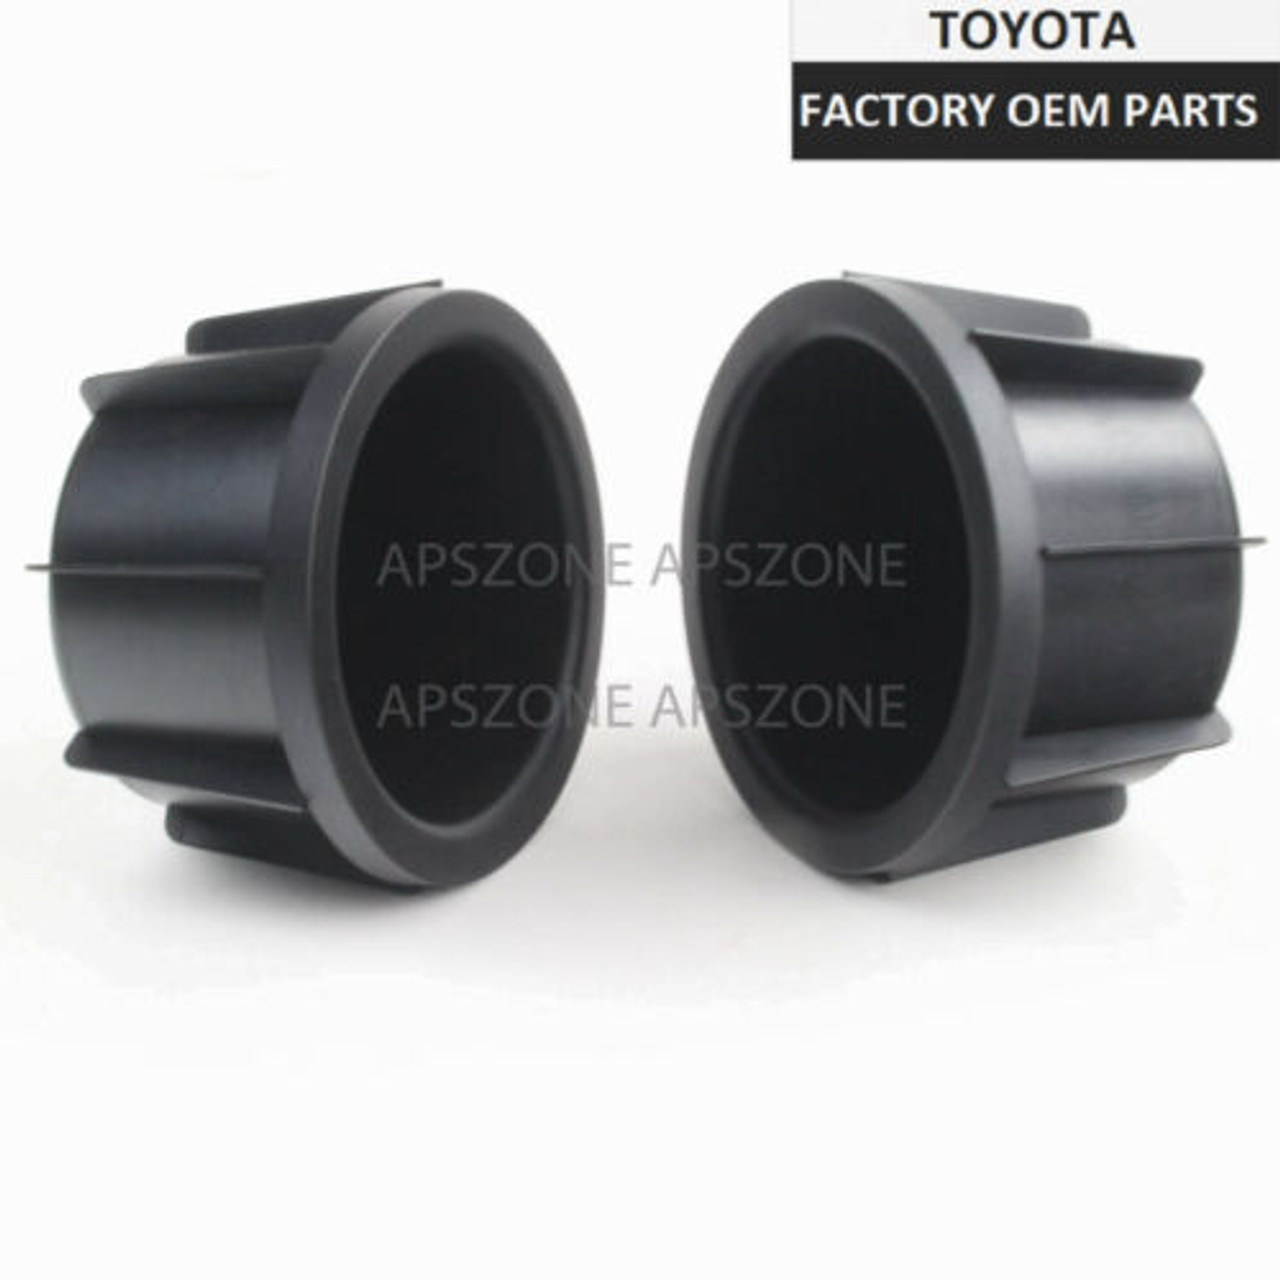 Details about   2006-2011 Toyota JPP RAV4 Front Console Cup Holder Inserts 55618-42040 SET OF 2,